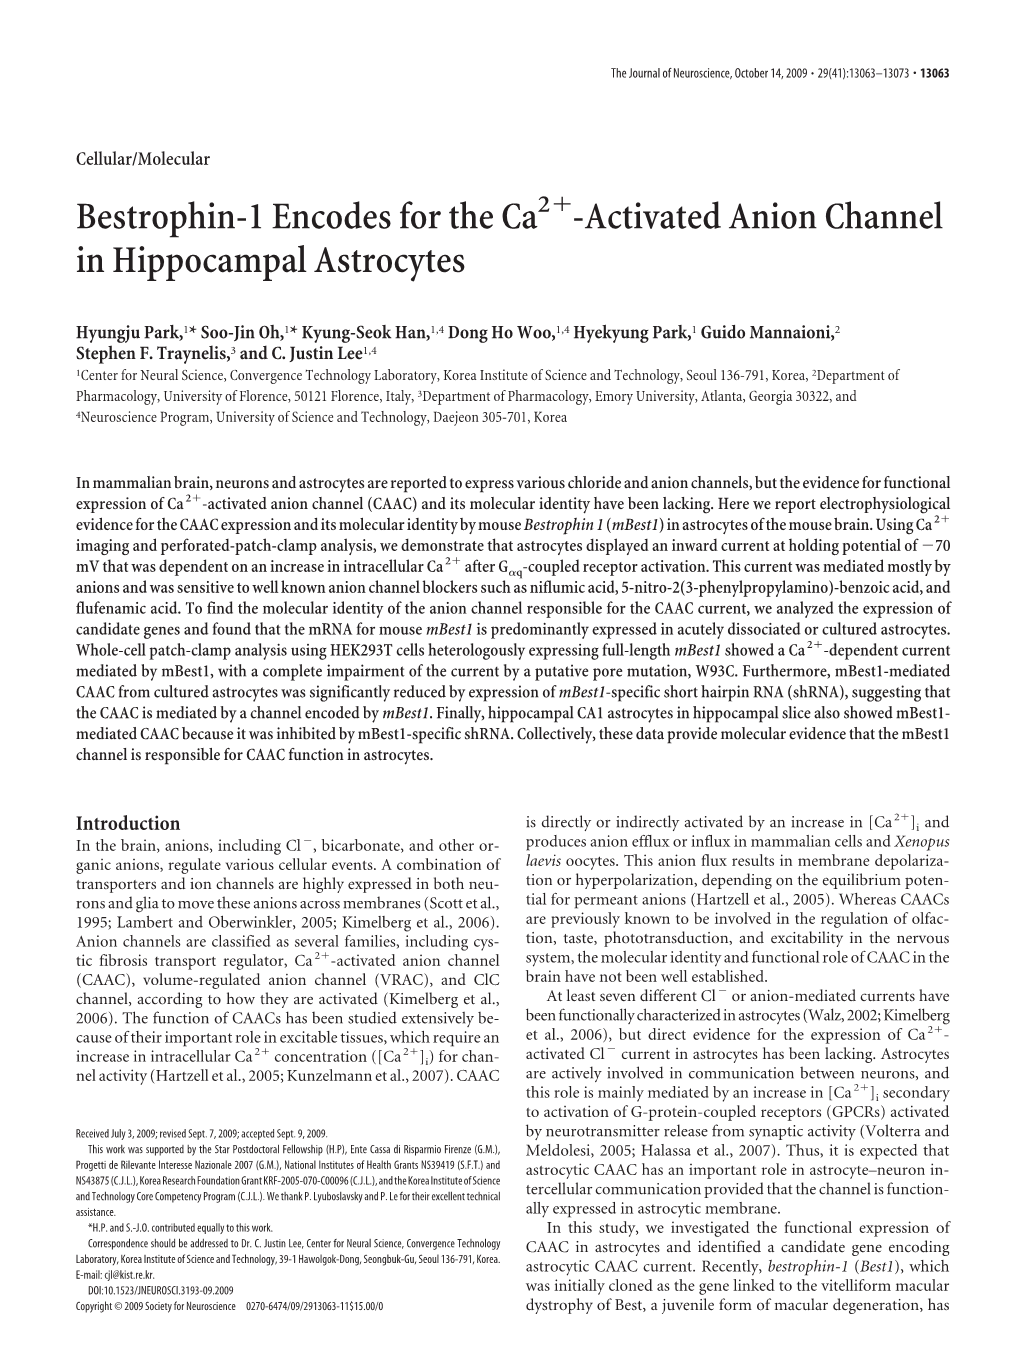 Activated Anion Channel in Hippocampal Astrocytes